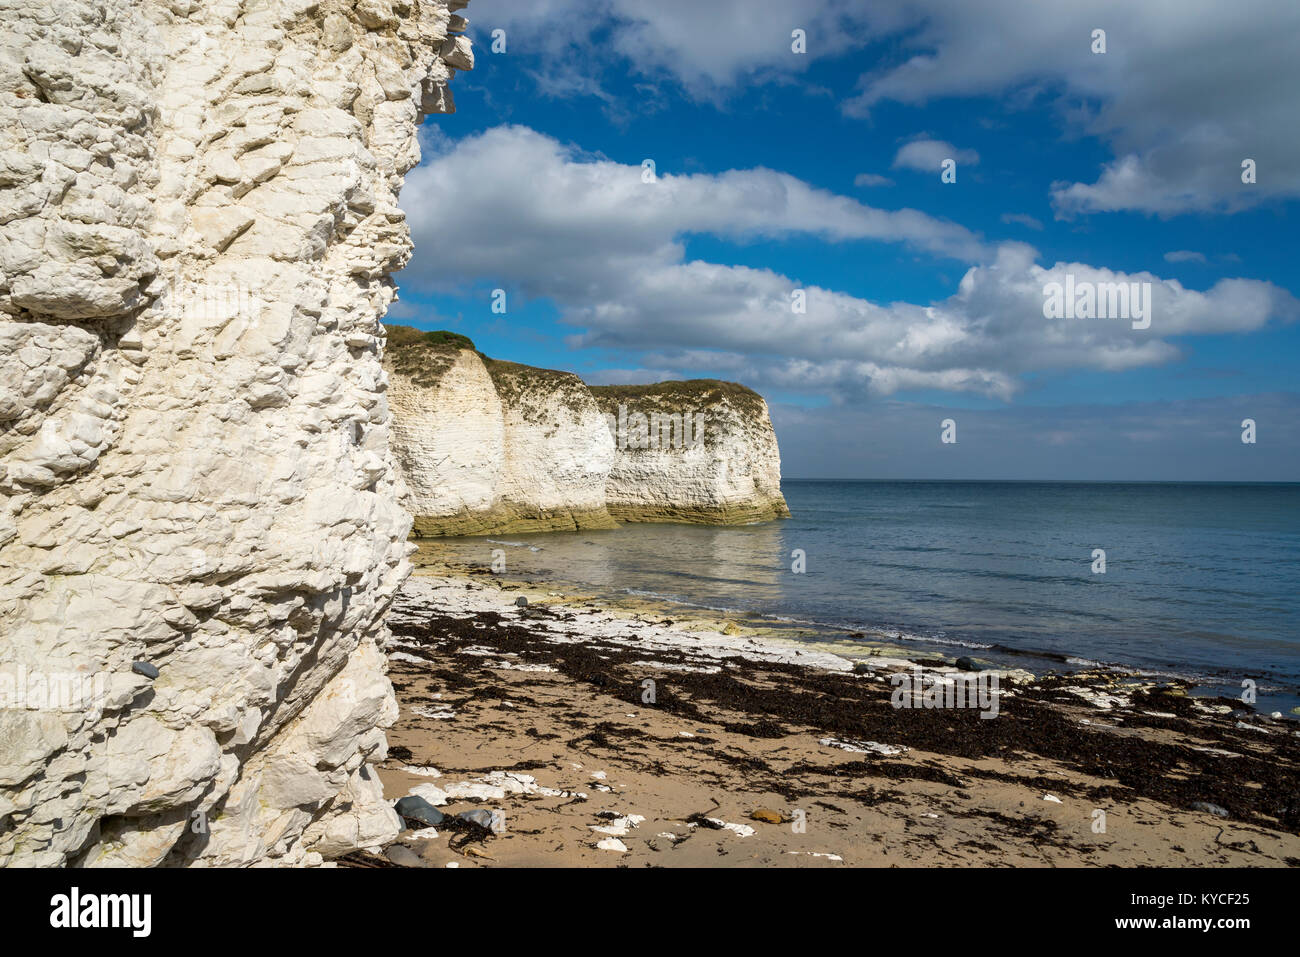 White chalk cliffs at Selwicks Bay on the east coast of England. Flamborough, North Yorkshire, England. Stock Photo